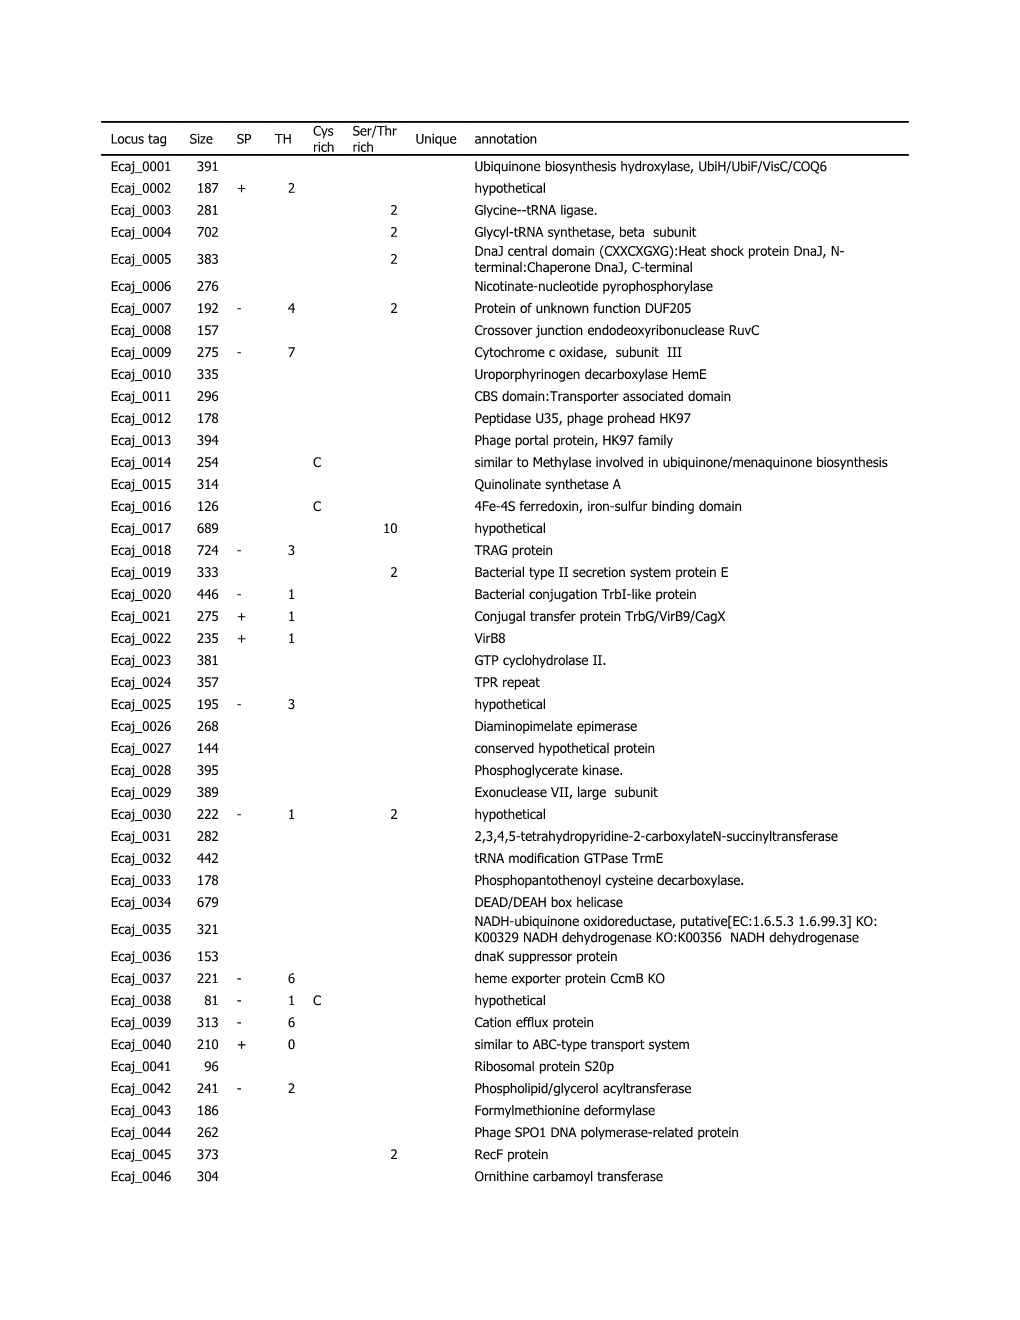 Supplementary Material - Table 1. List of Proteins Properties in E.Canis. Locus Tag And